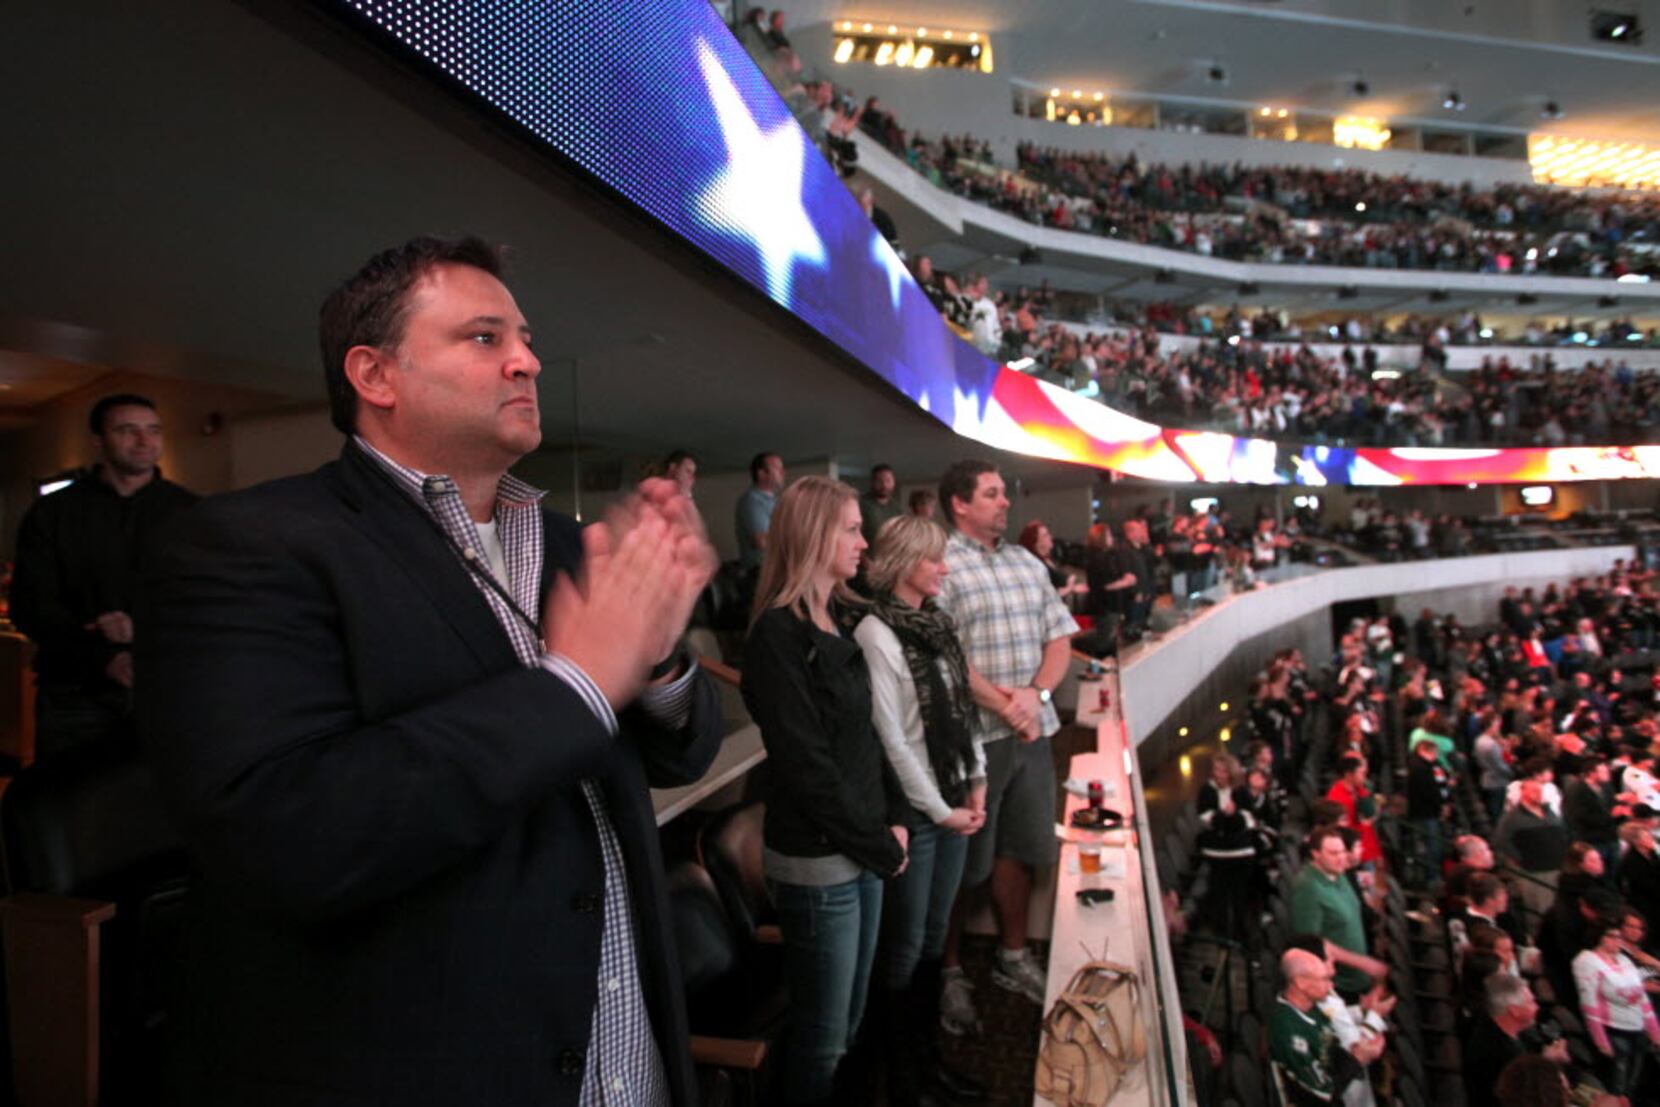 Dallas Stars legend Sergei Zubov left speechless by the spectacle of his  jersey retirement